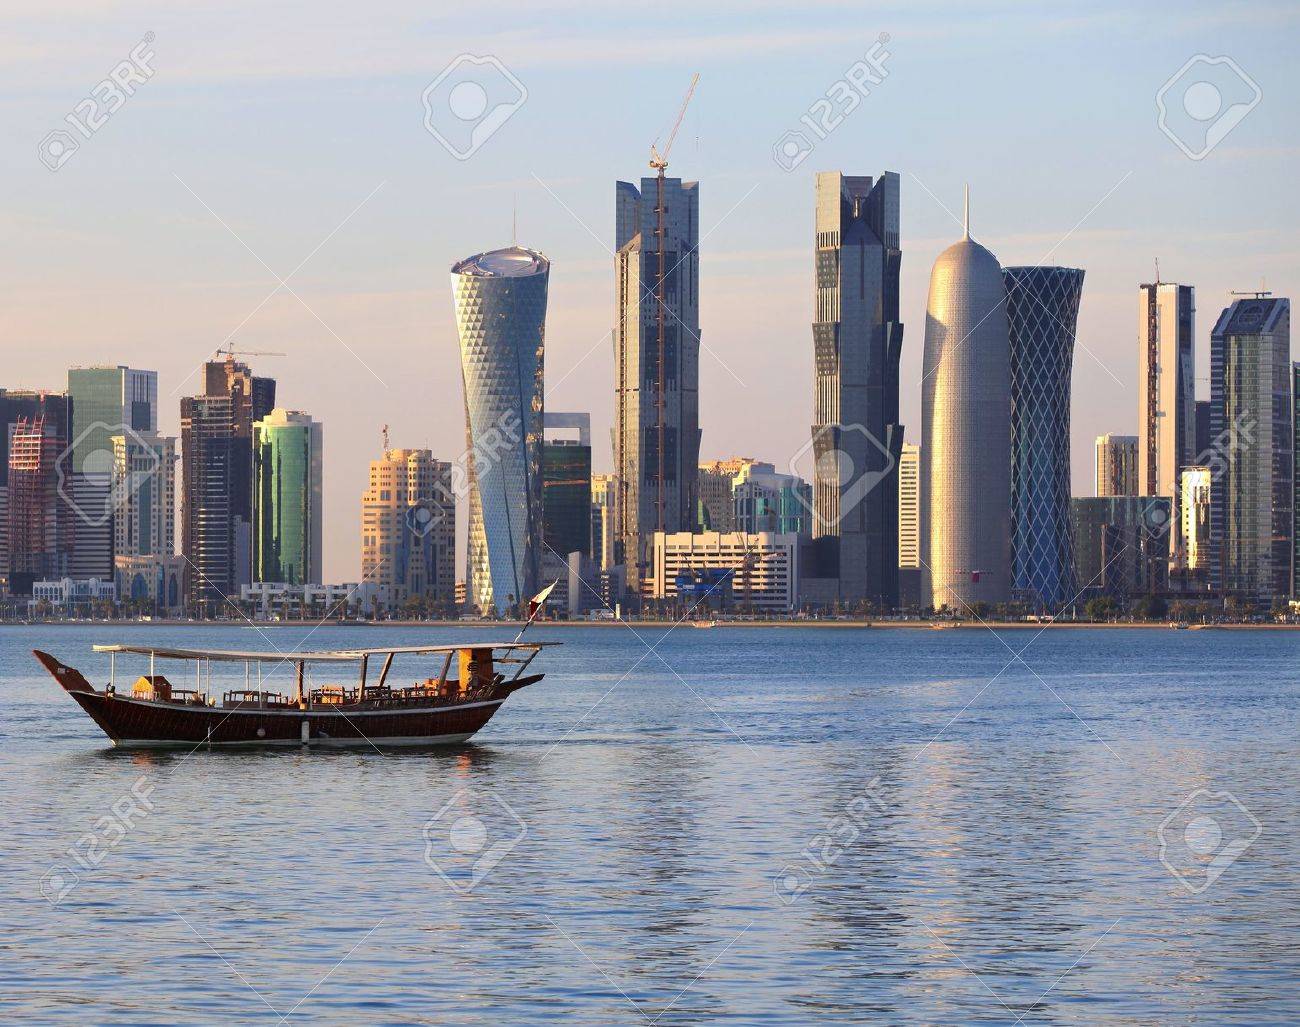 A Dhow Returns To Harbour In Doha Qatar At Sunset With The